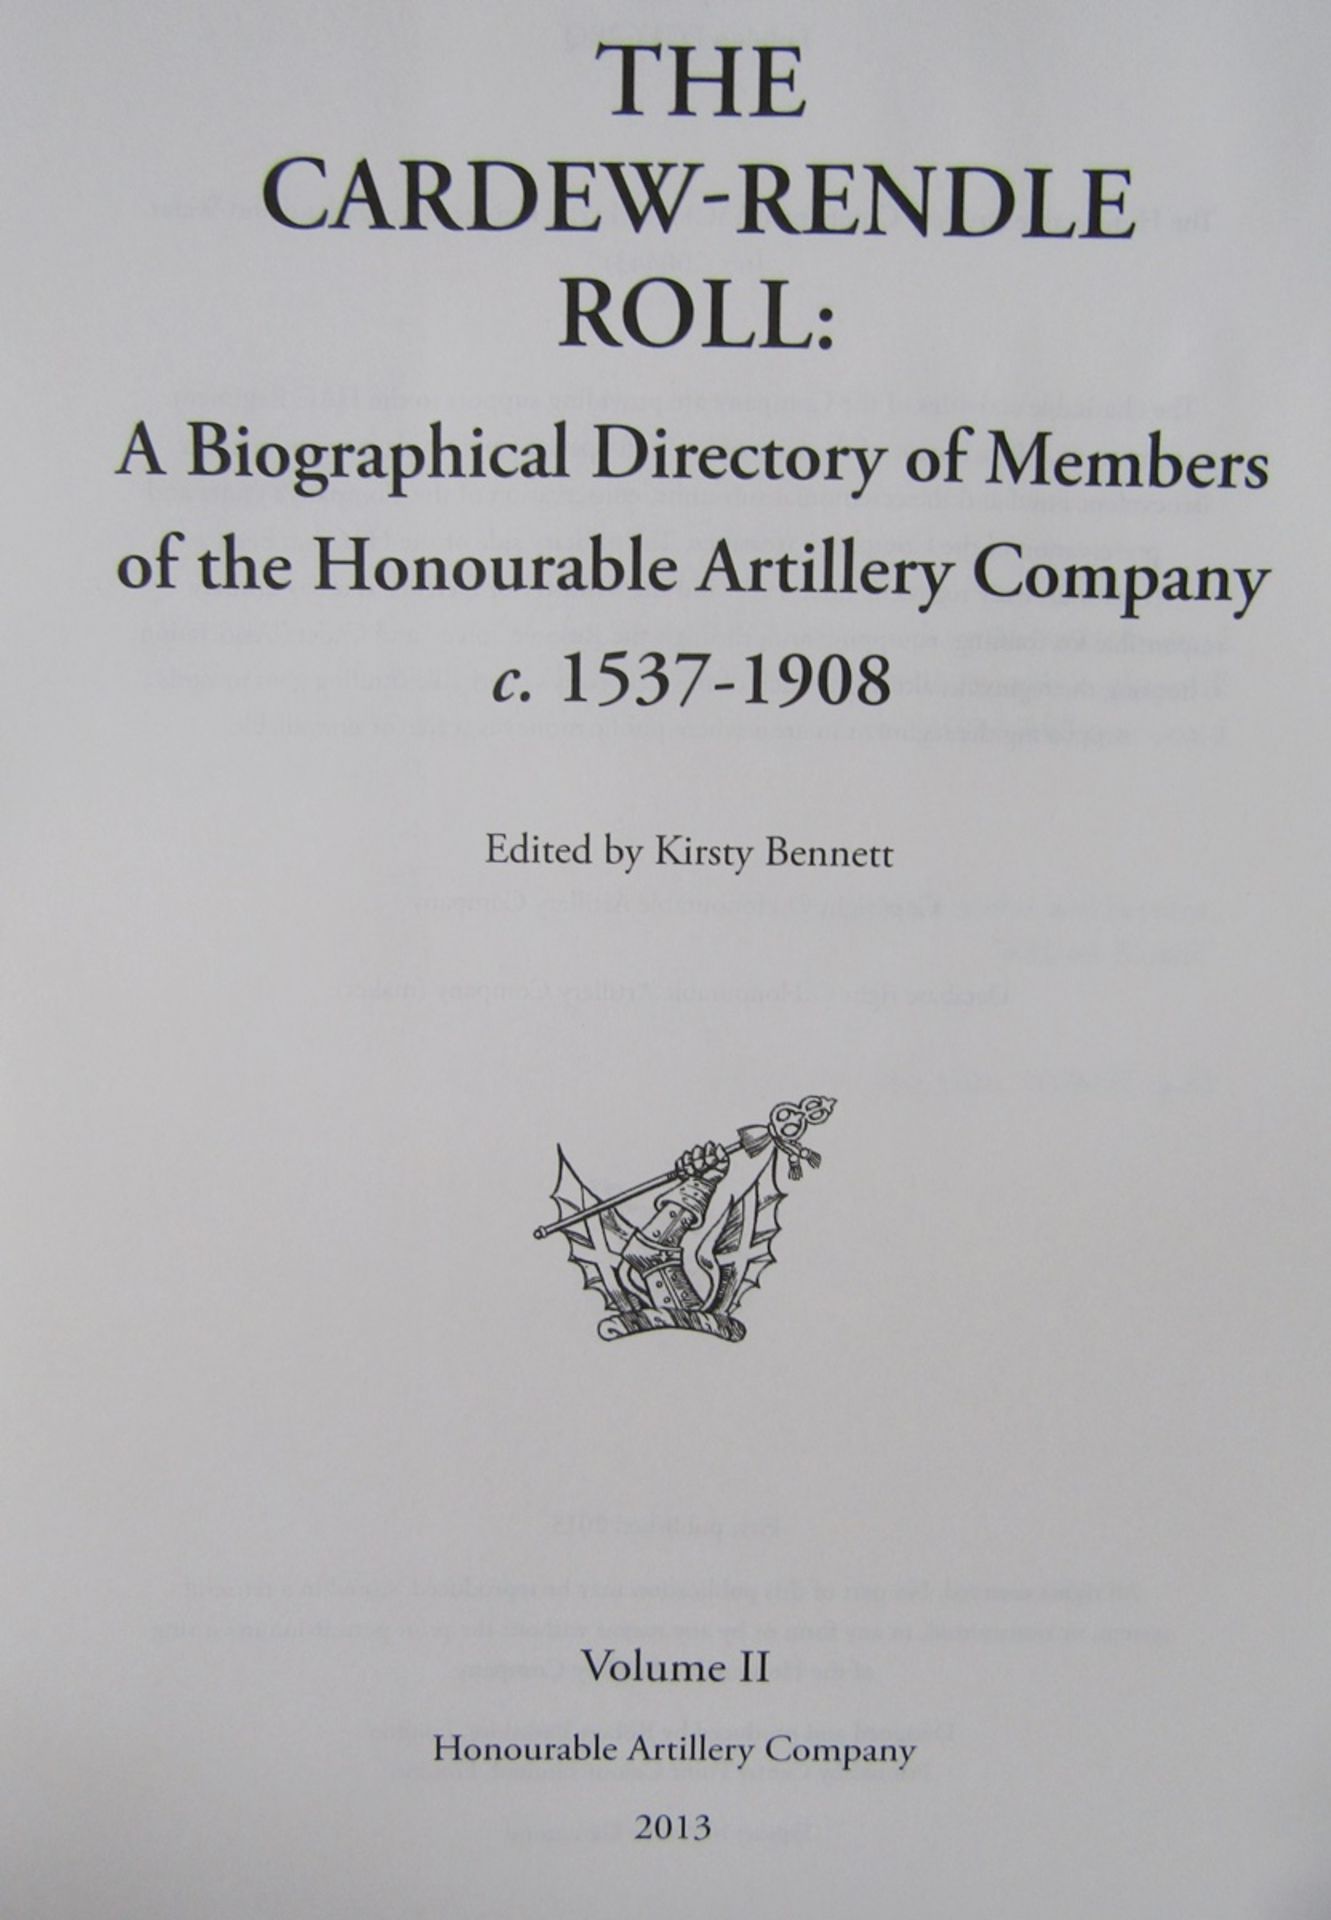 Bennett, Kirsty "The Cardew-Rendle Roll: A Biographical Directory of The Honourable Artillery - Image 13 of 23